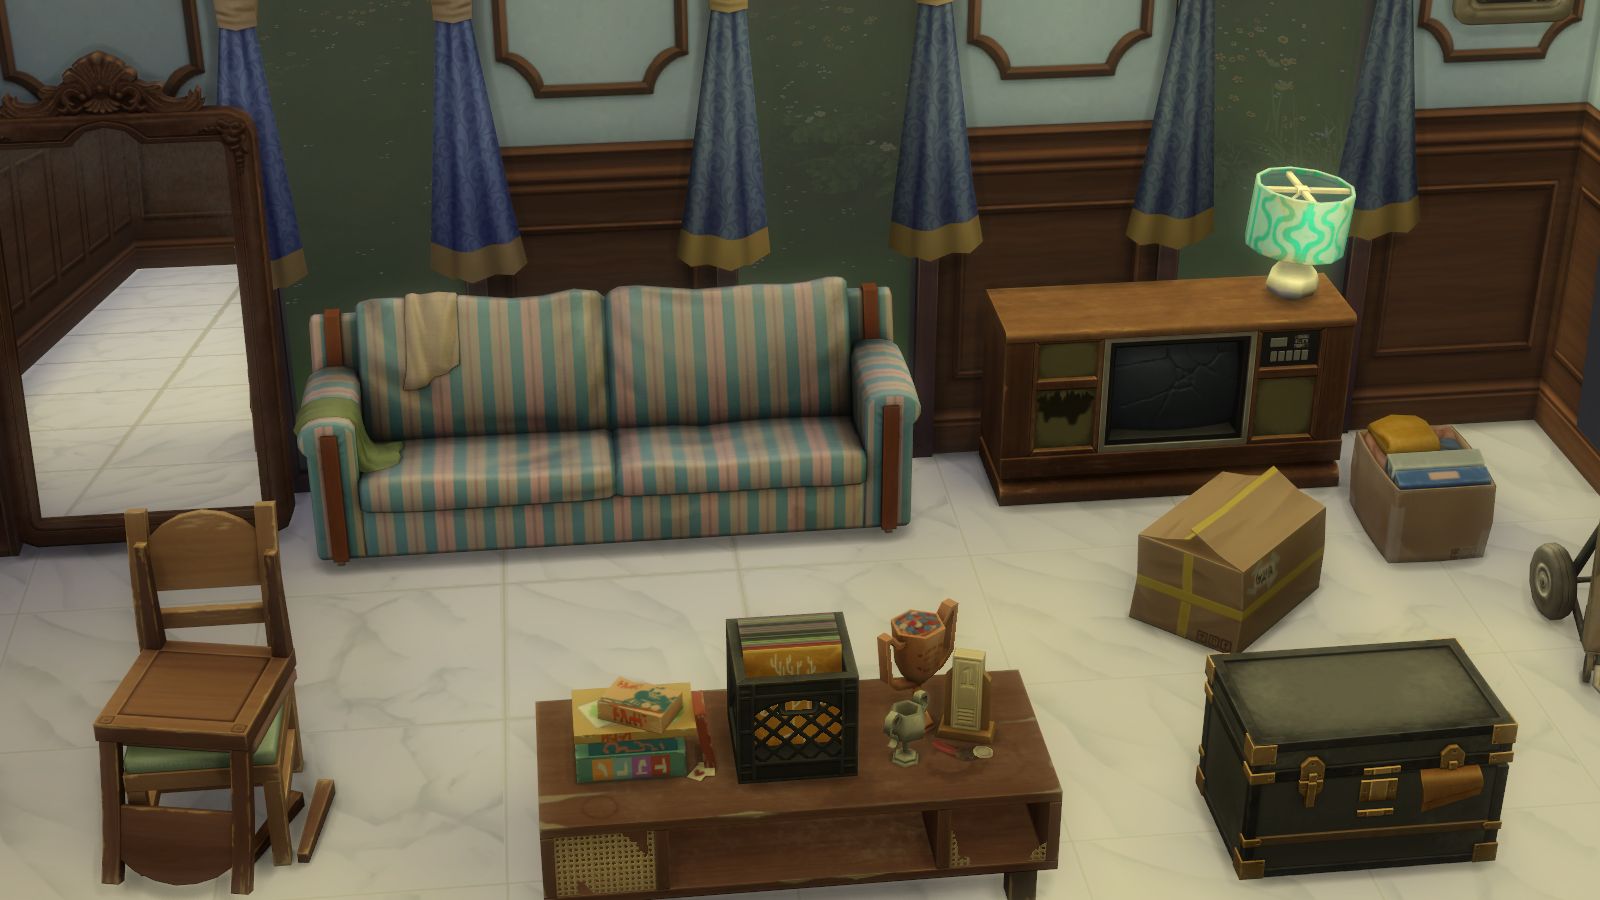 The Sims 4: Basement Treasures & Greenhouse Haven Kit review --- Affordable  content that adds a lot to your game — GAMINGTREND